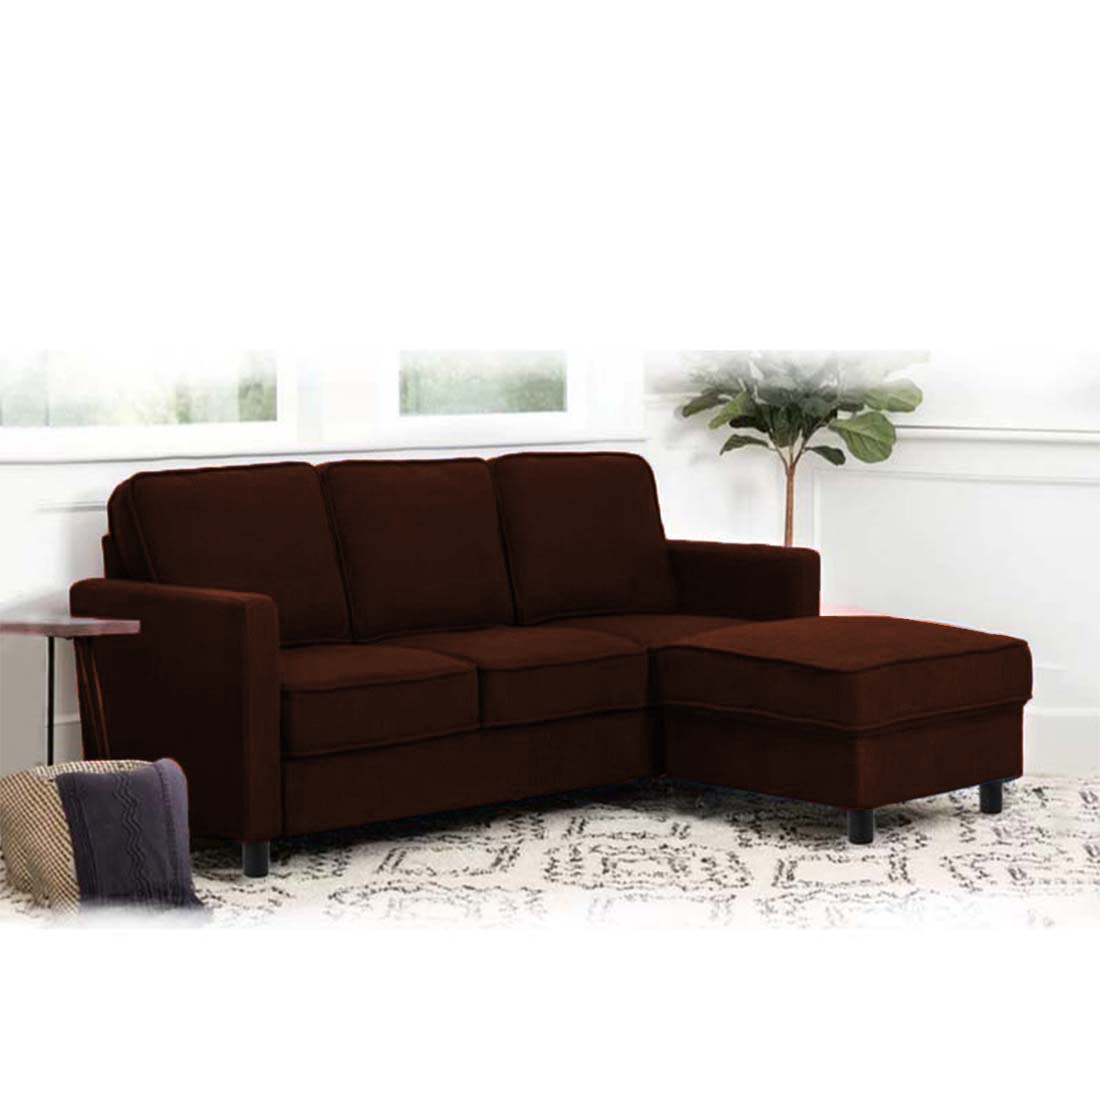 Torque India Federica 3 Seater Fabric Sofa With Ottoman For Living Room